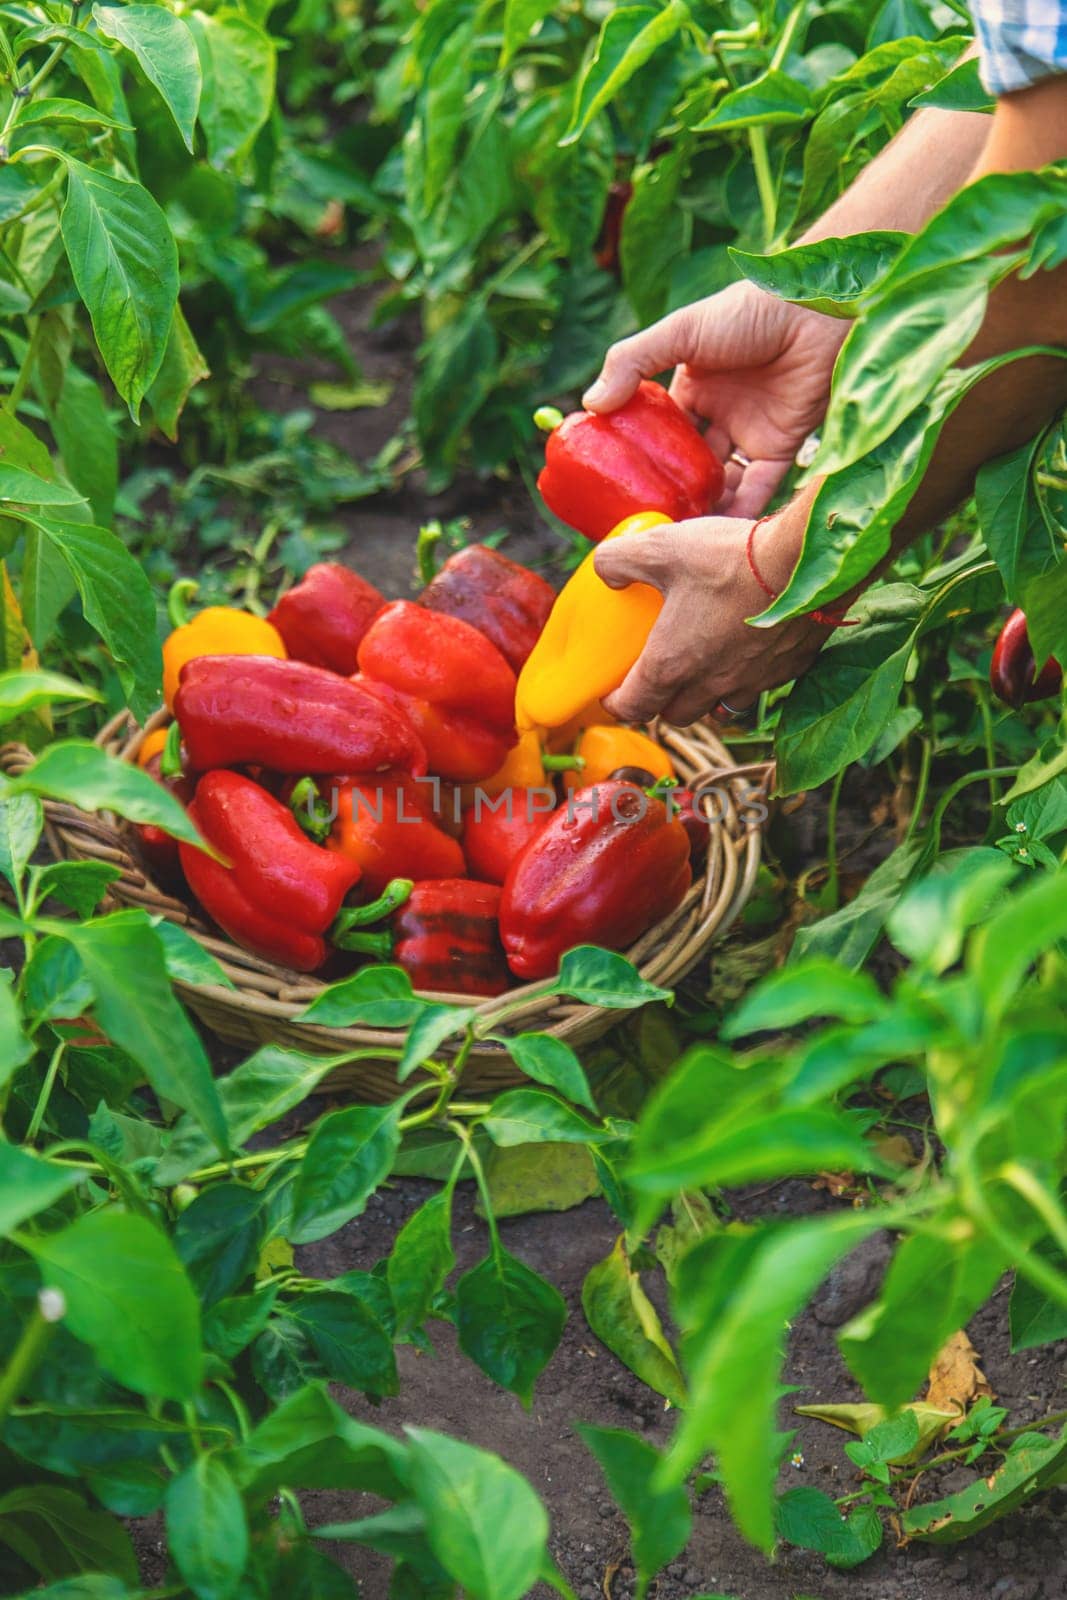 Sweet pepper harvest in the garden in the hands of a farmer. Selective focus. by yanadjana